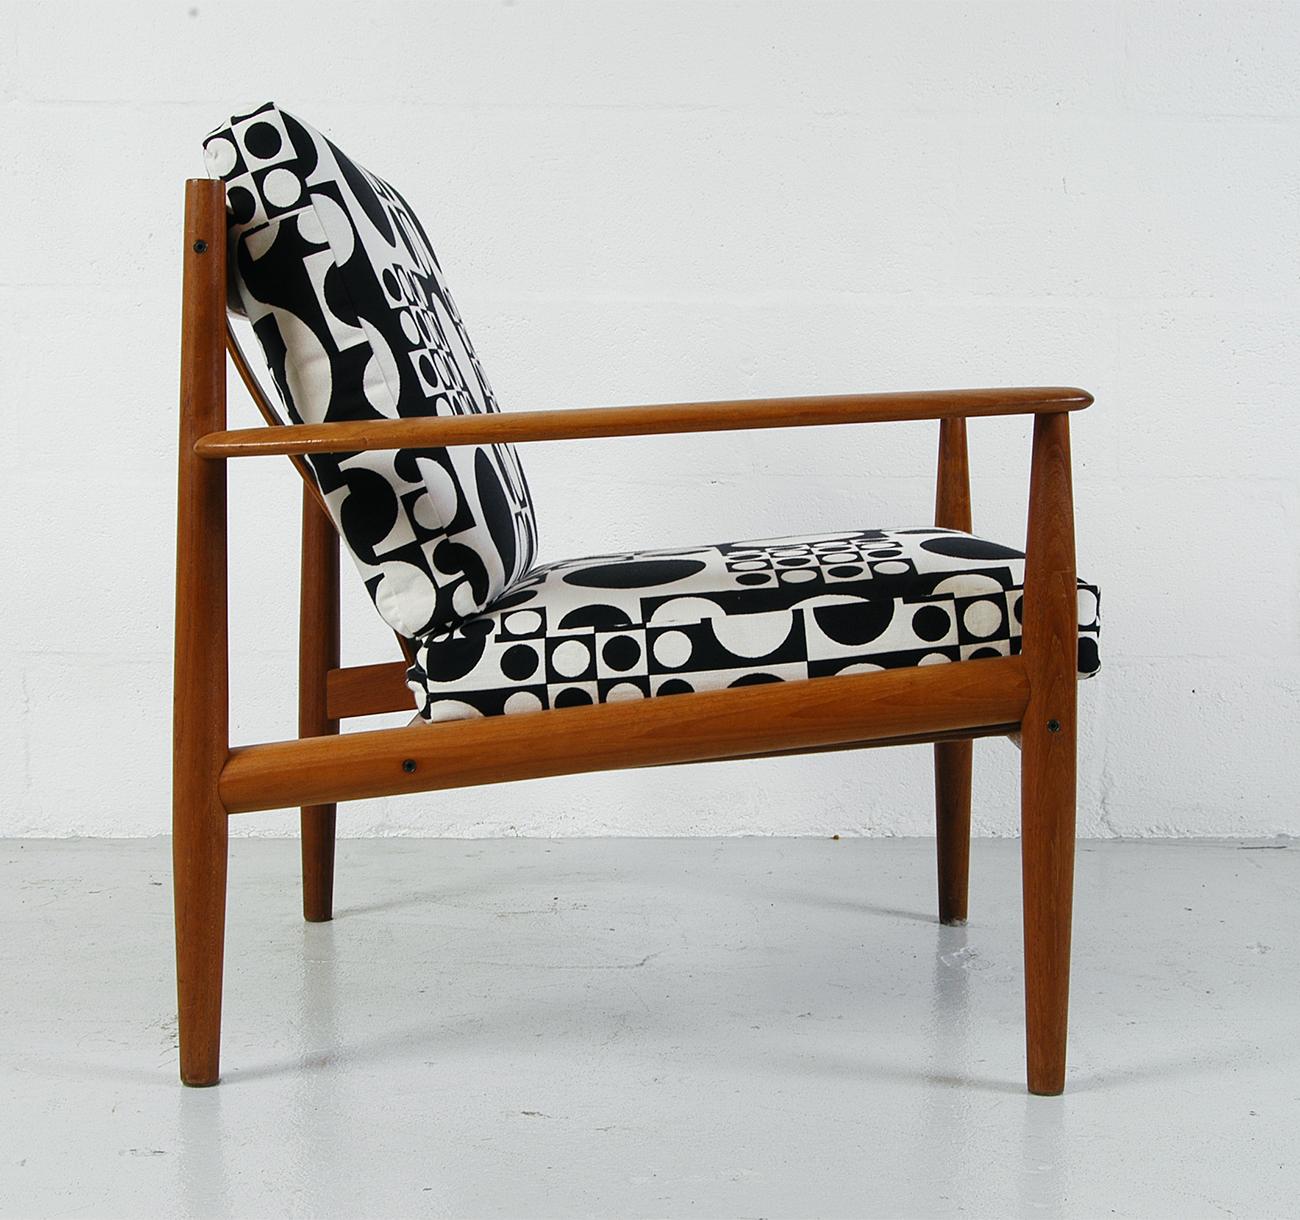 Incredibly stylish midcentury easy chair designed by Grete Jalk (Model 118), manufactured by France & Son in Denmark. The frame is made from teak and the cushions have been upholstered in a bold black and white vintage Maharam fabric - ‘Geometri’